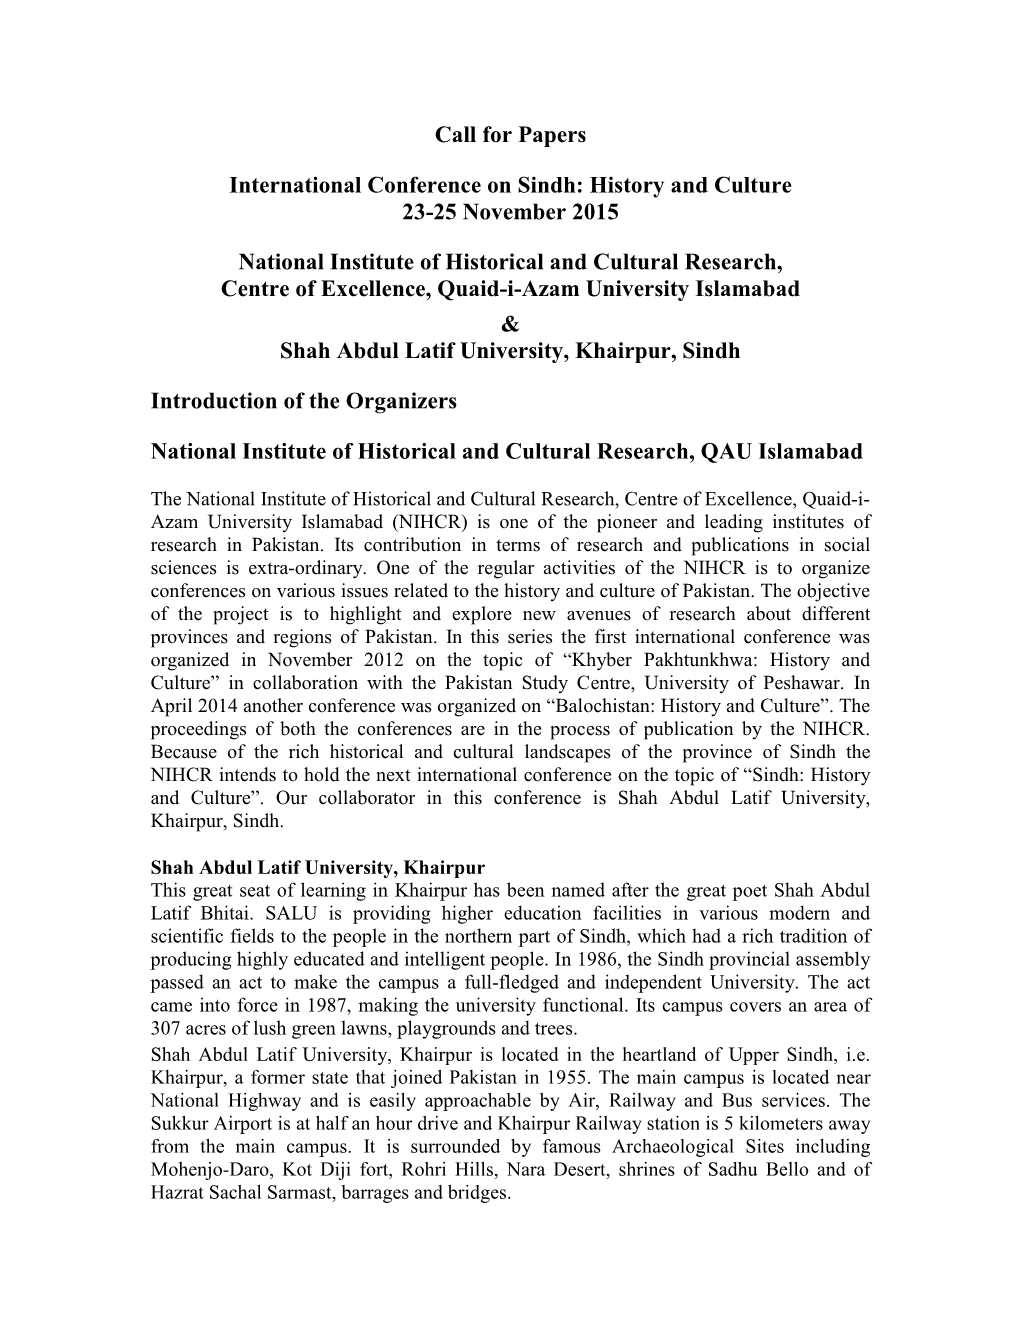 Call for Papers International Conference on Sindh